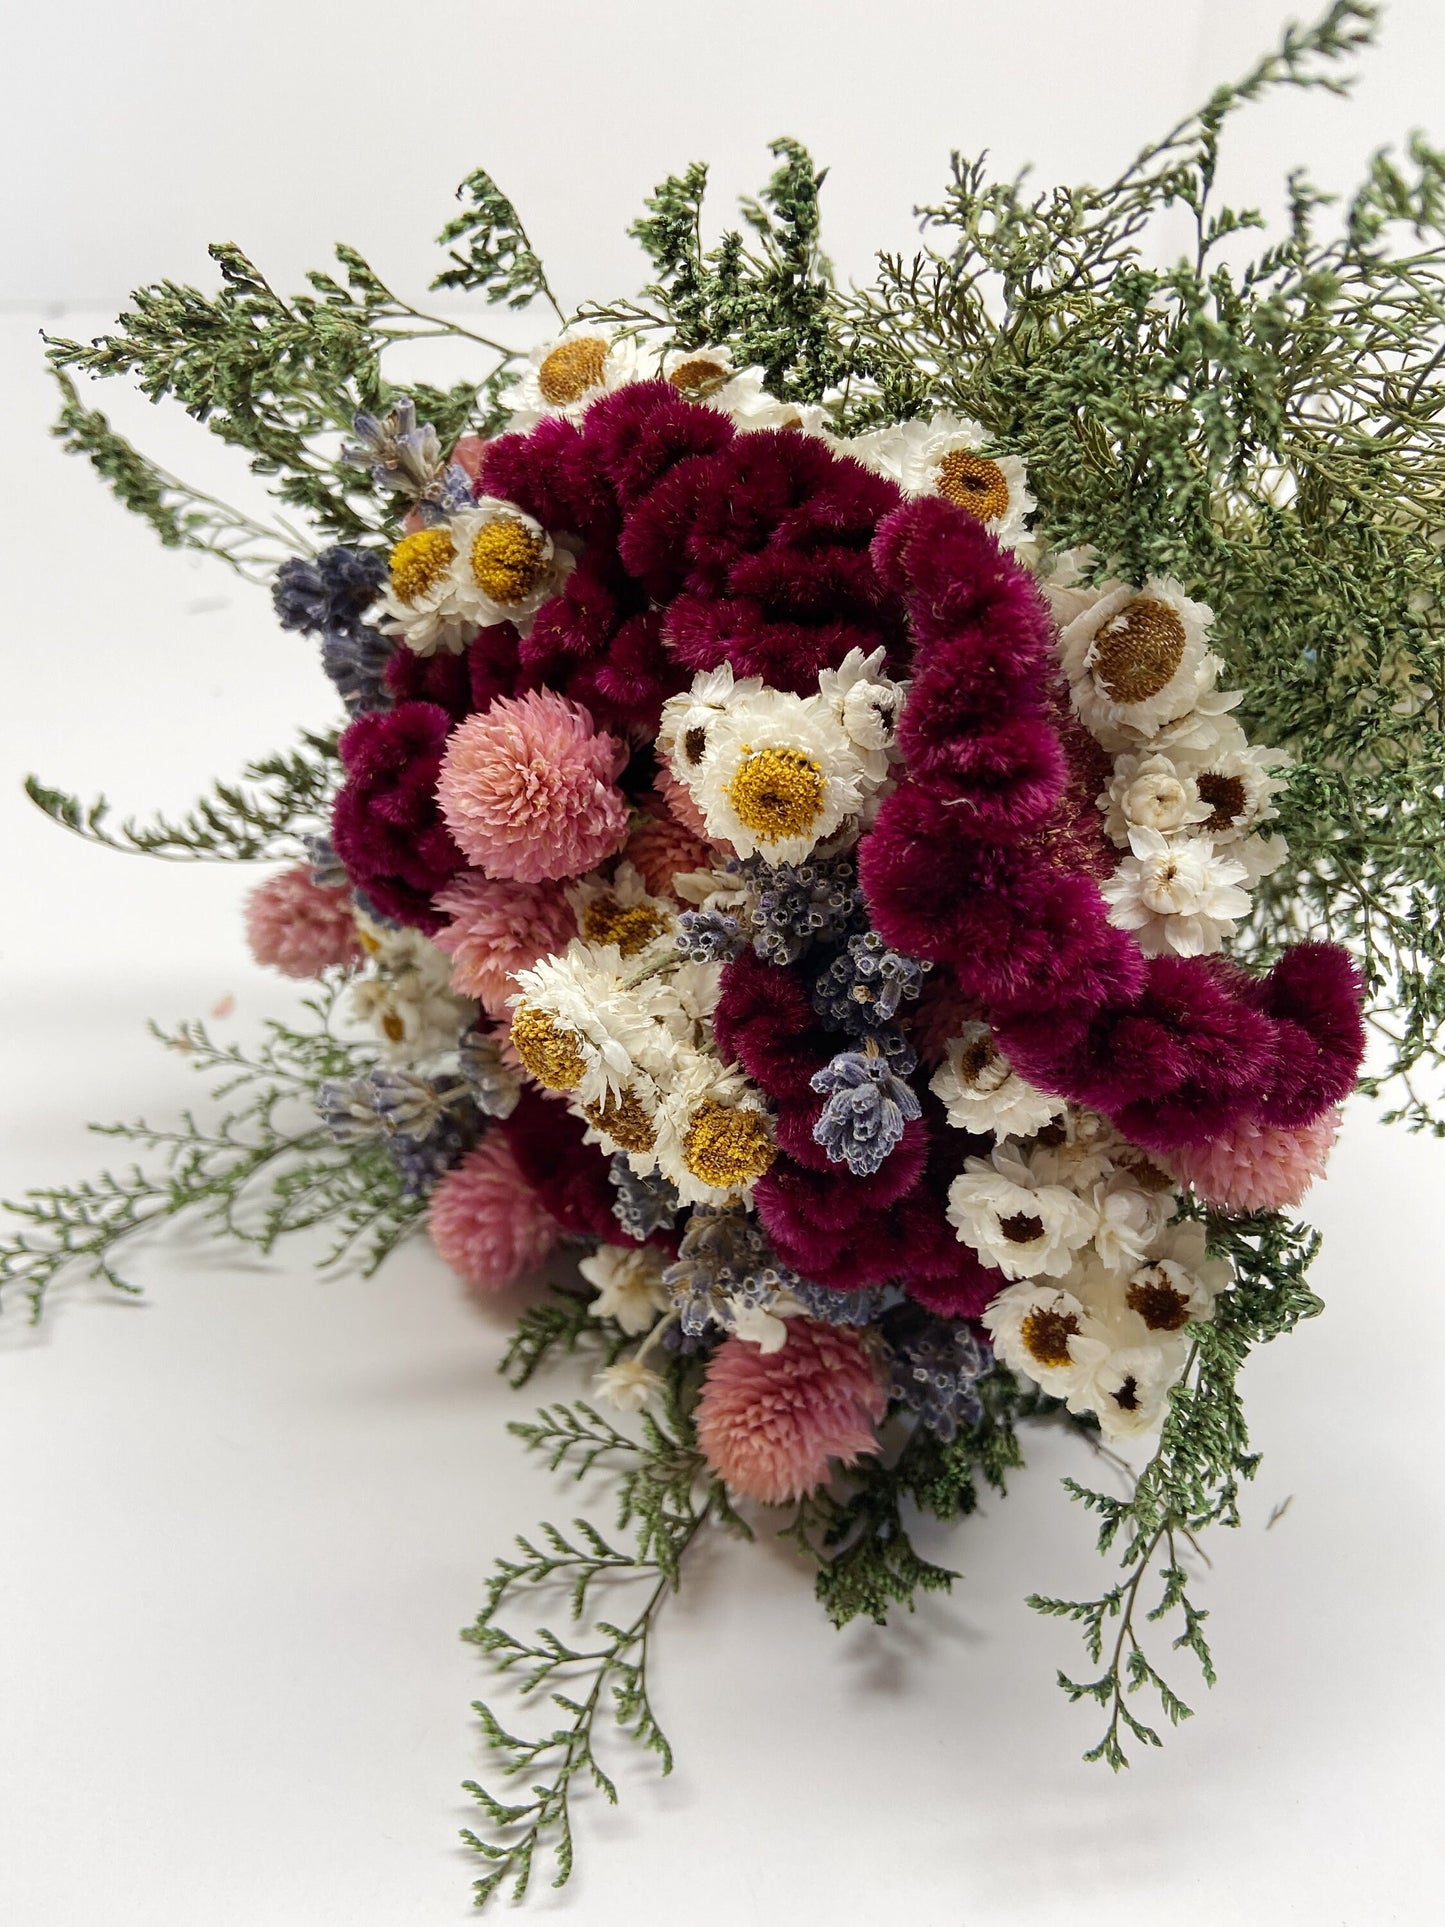 Spring Collection, Bouquet, Natural Flowers, Dried, Bridal, Wedding, Floral, Colorful, Bridesmaid, Pink, Lavender, Globe Amaranth, Caspia